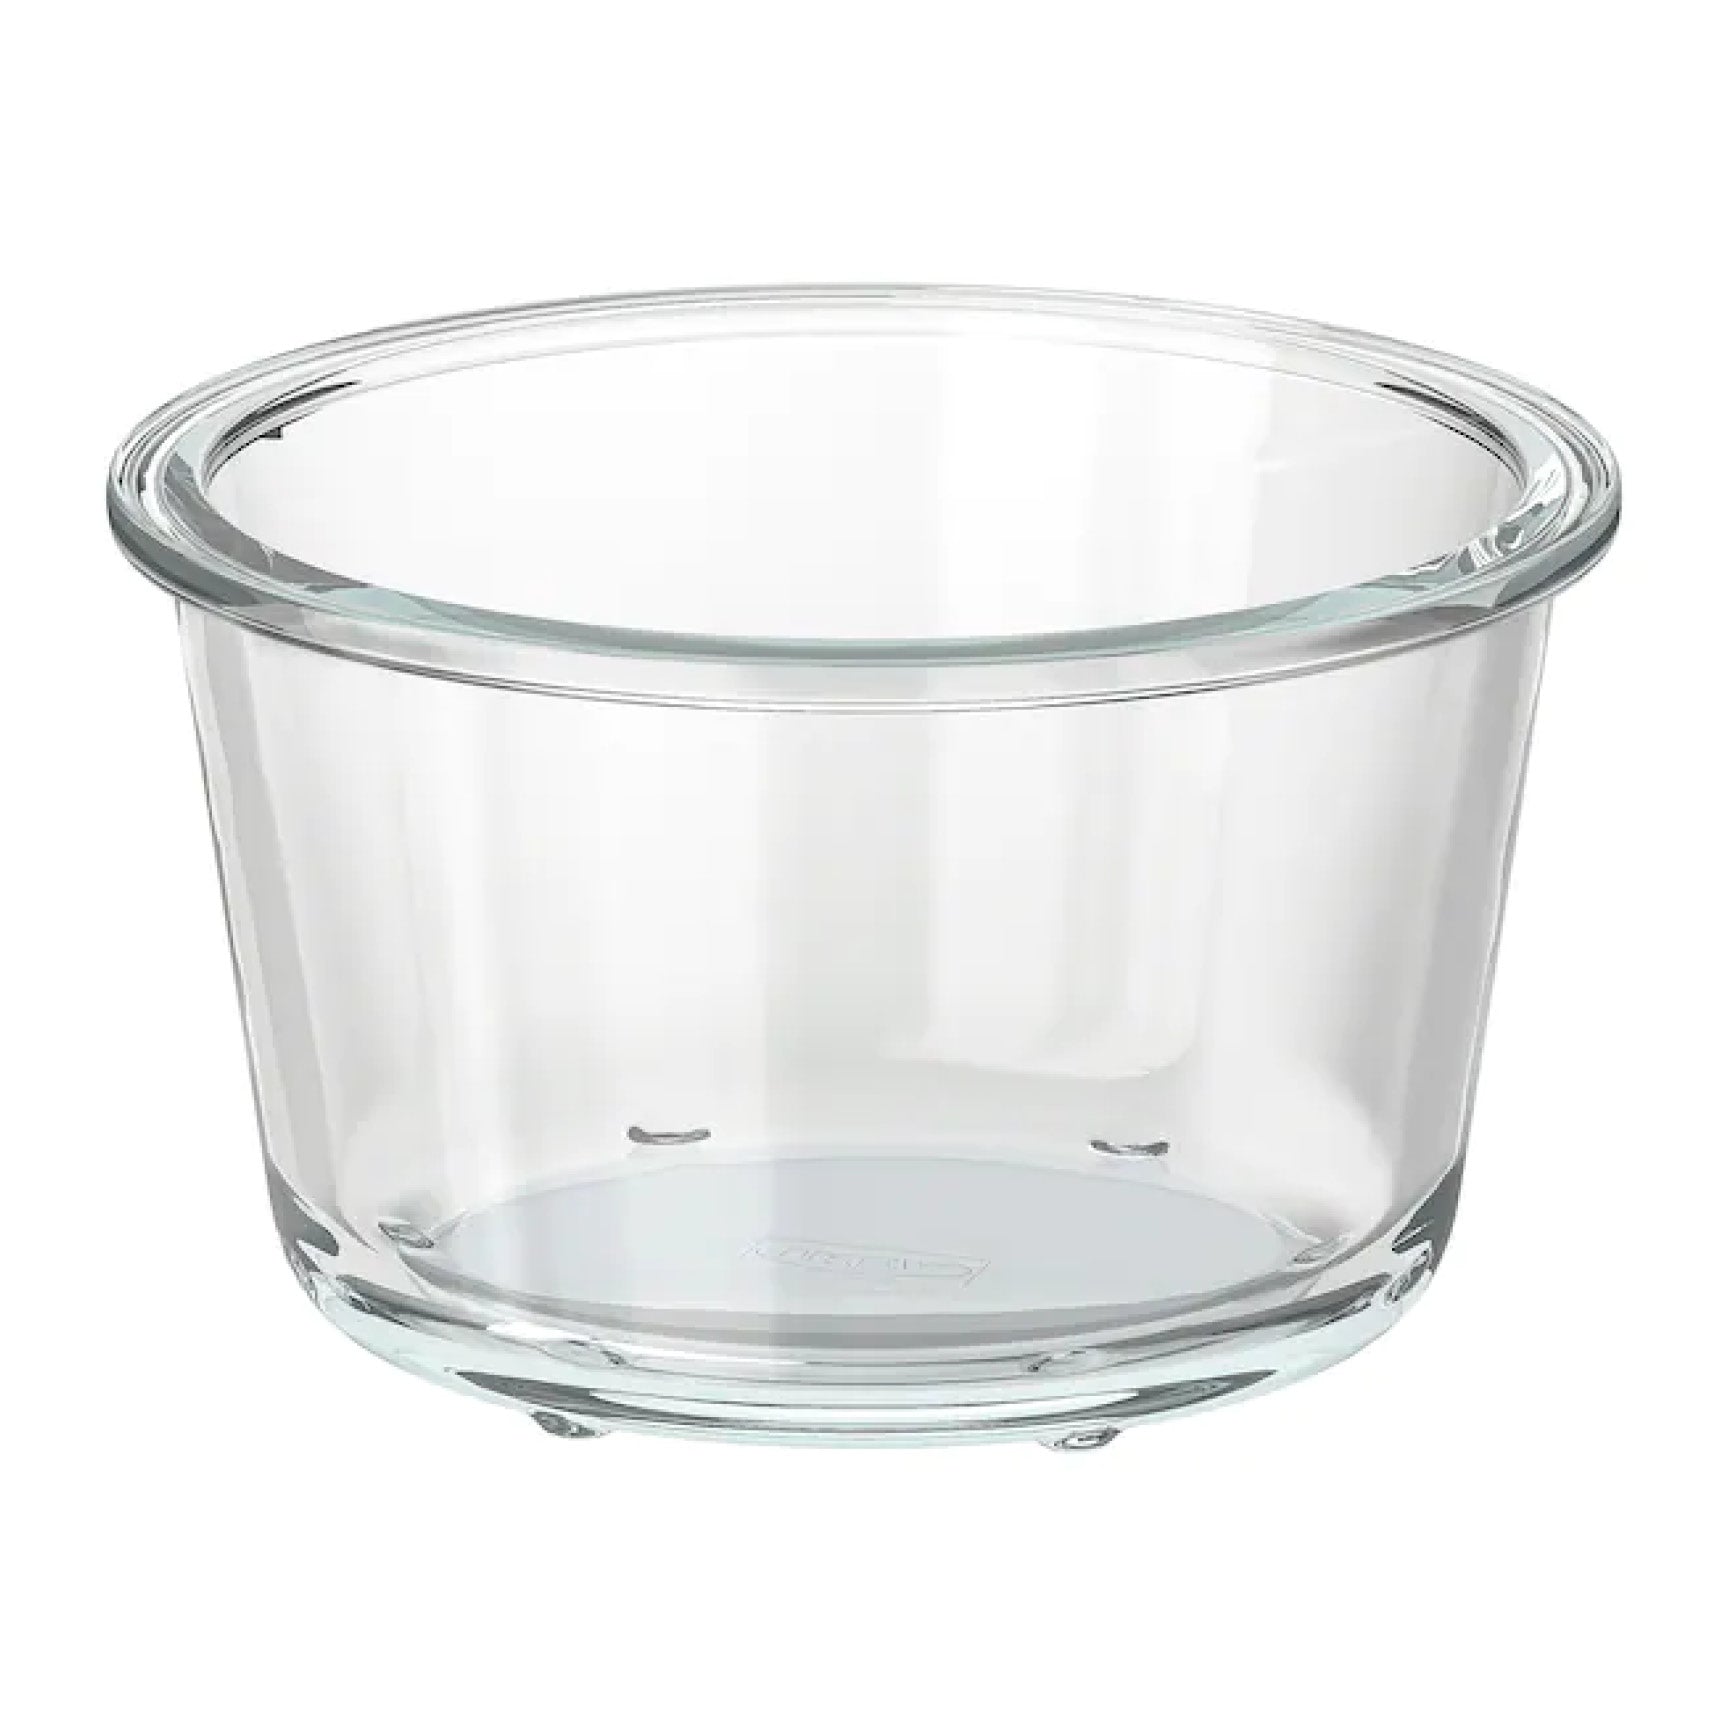 Ikea 365+ Round glass food container, 600 ml